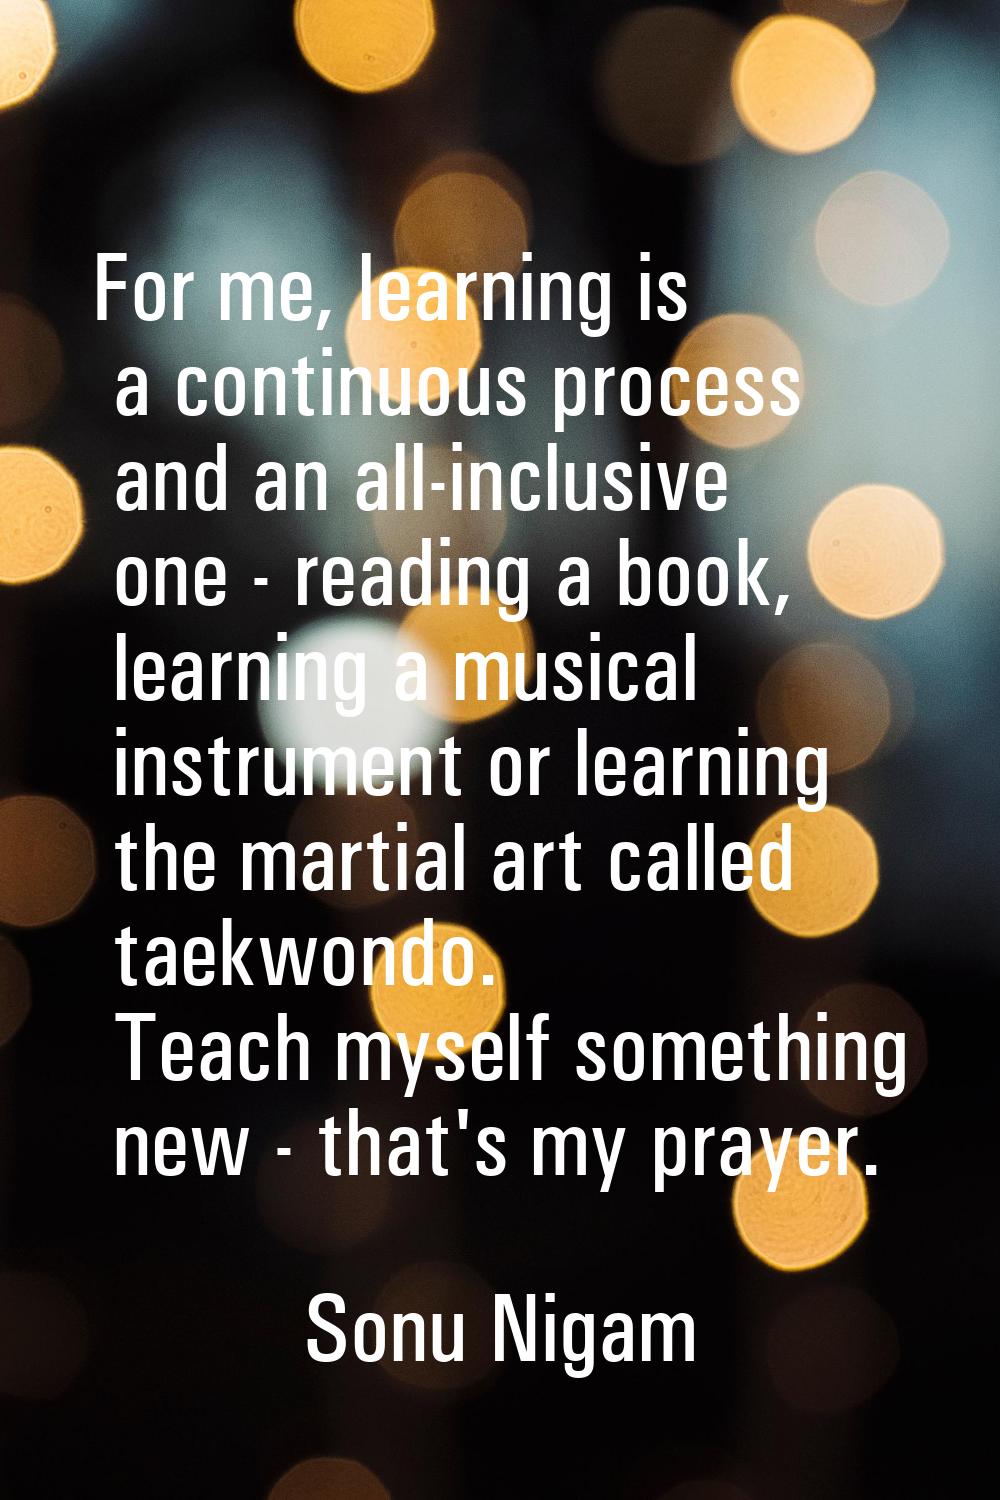 For me, learning is a continuous process and an all-inclusive one - reading a book, learning a musi